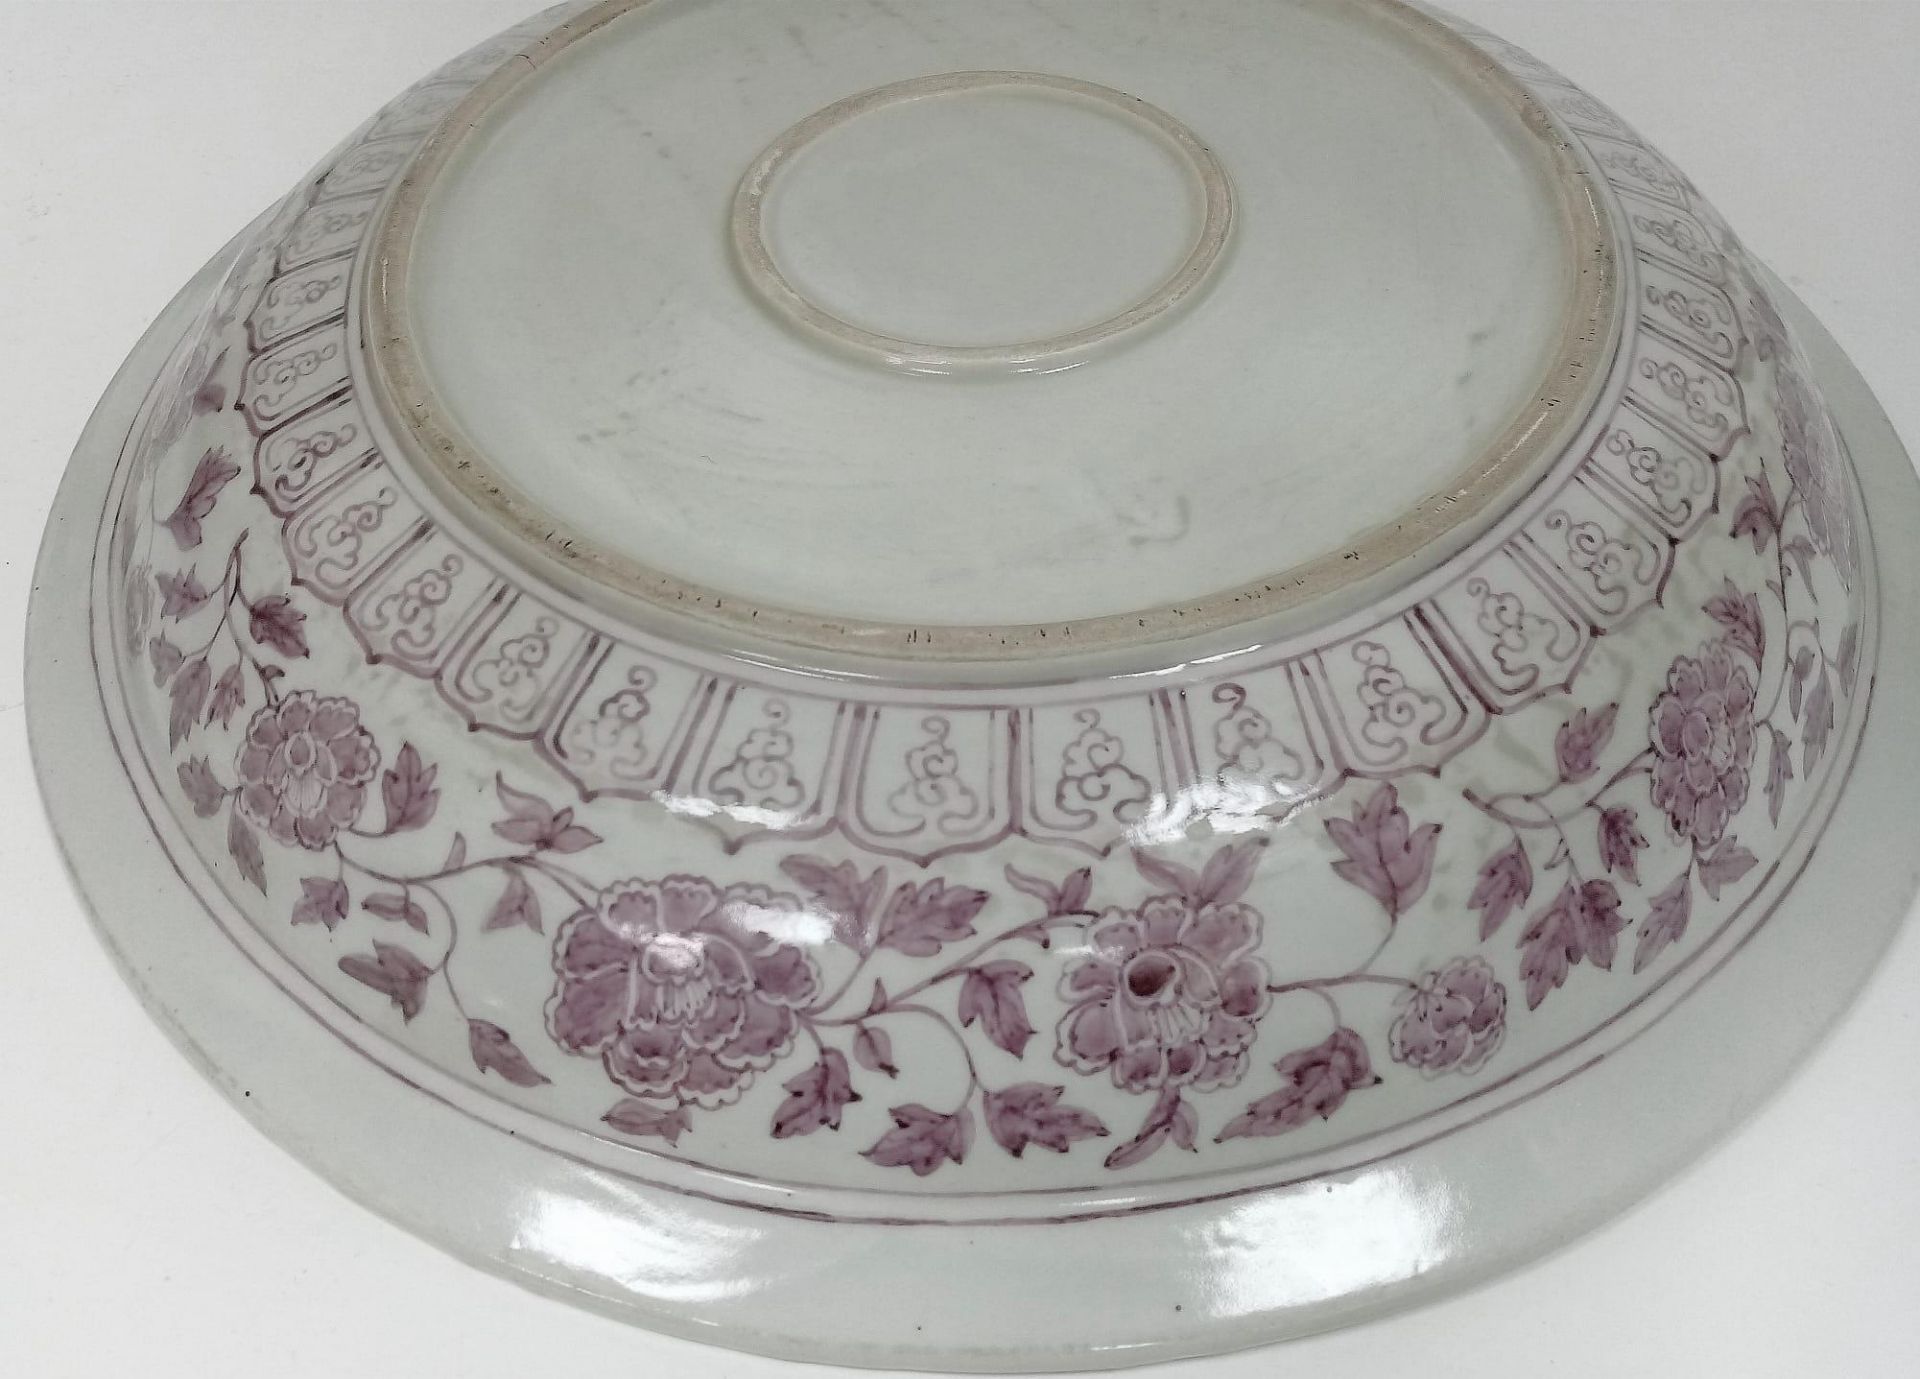 Large Antique Burgundy Floral Serving Dish. Whilst no markings exist on this large bowl, the hand- - Image 5 of 6